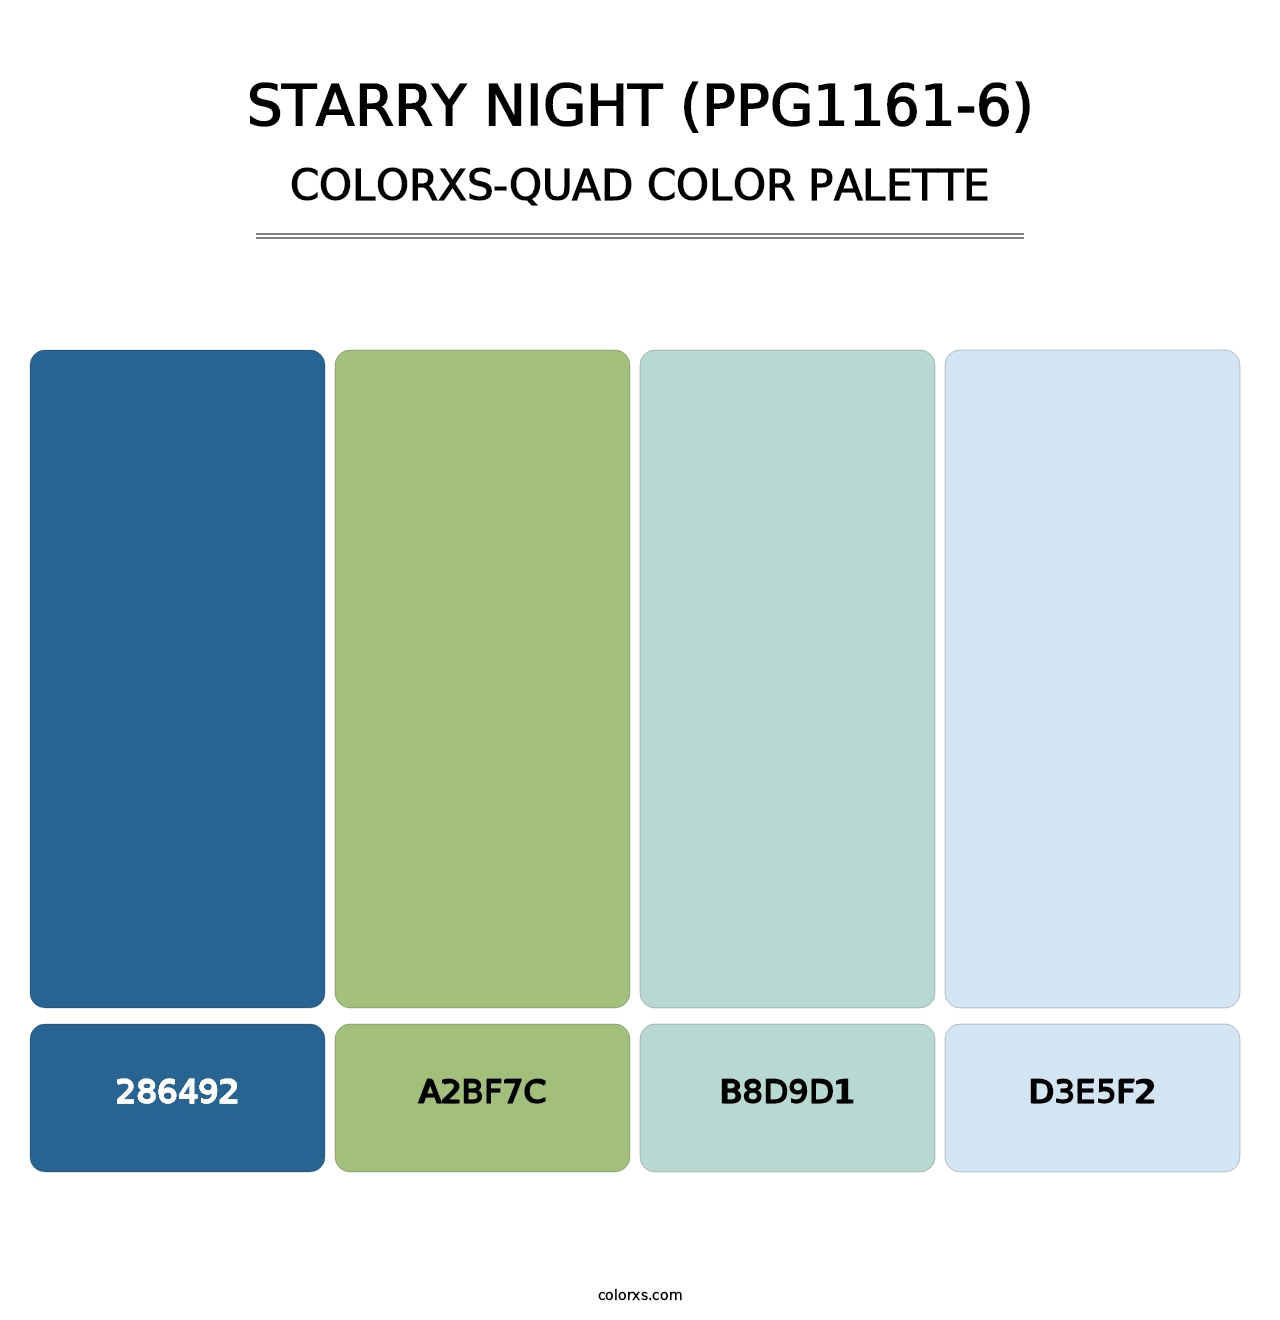 Starry Night (PPG1161-6) - Colorxs Quad Palette